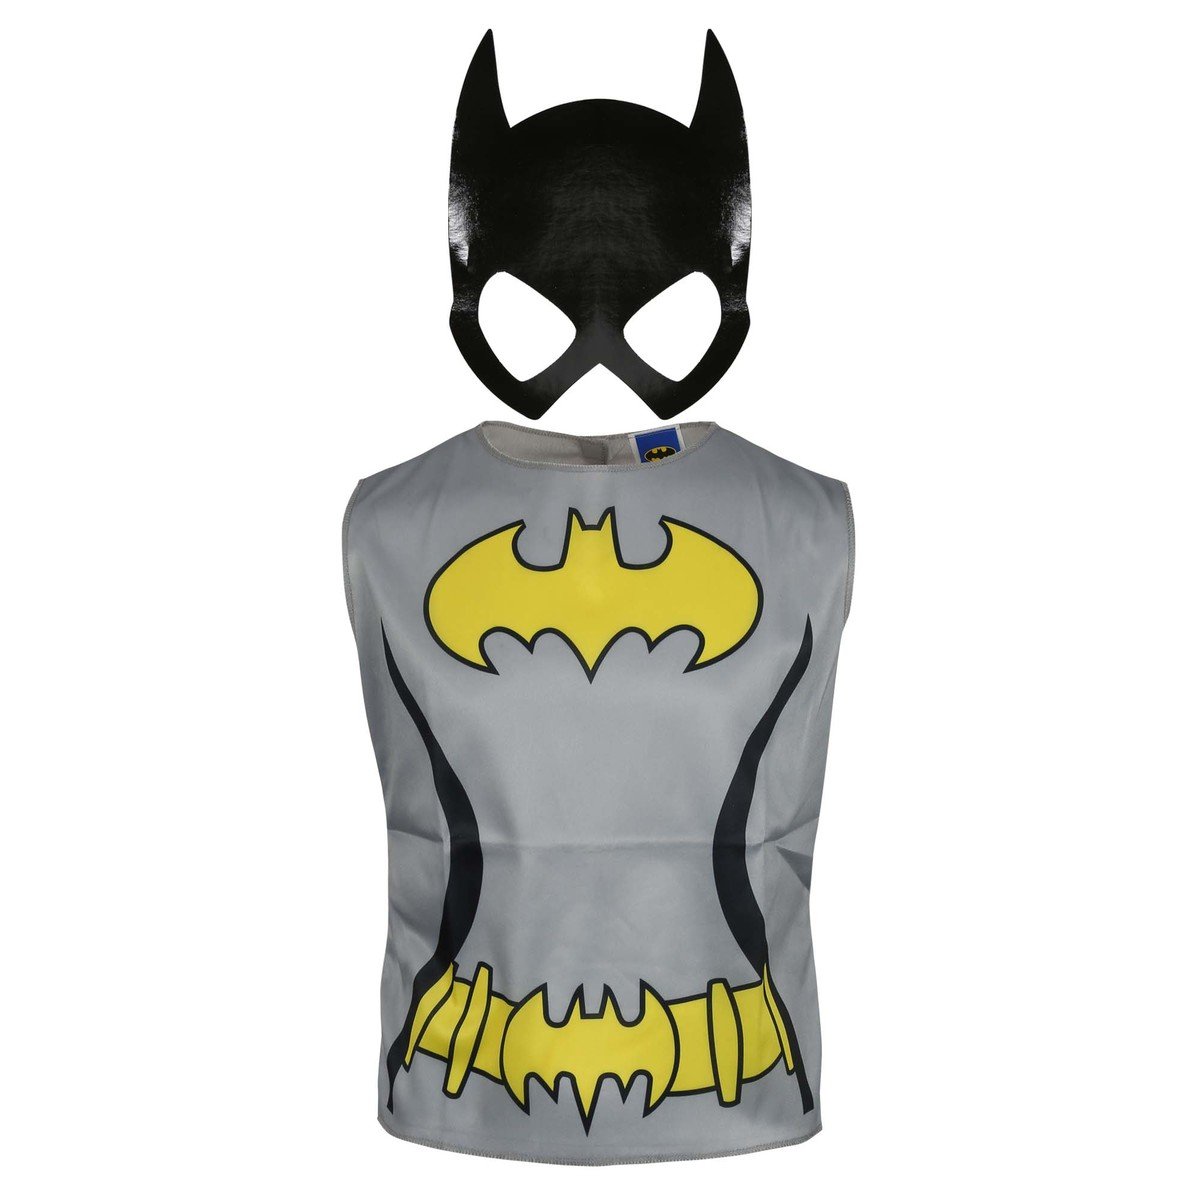 Batgirl Party Costume 33694 Size 3-6Y